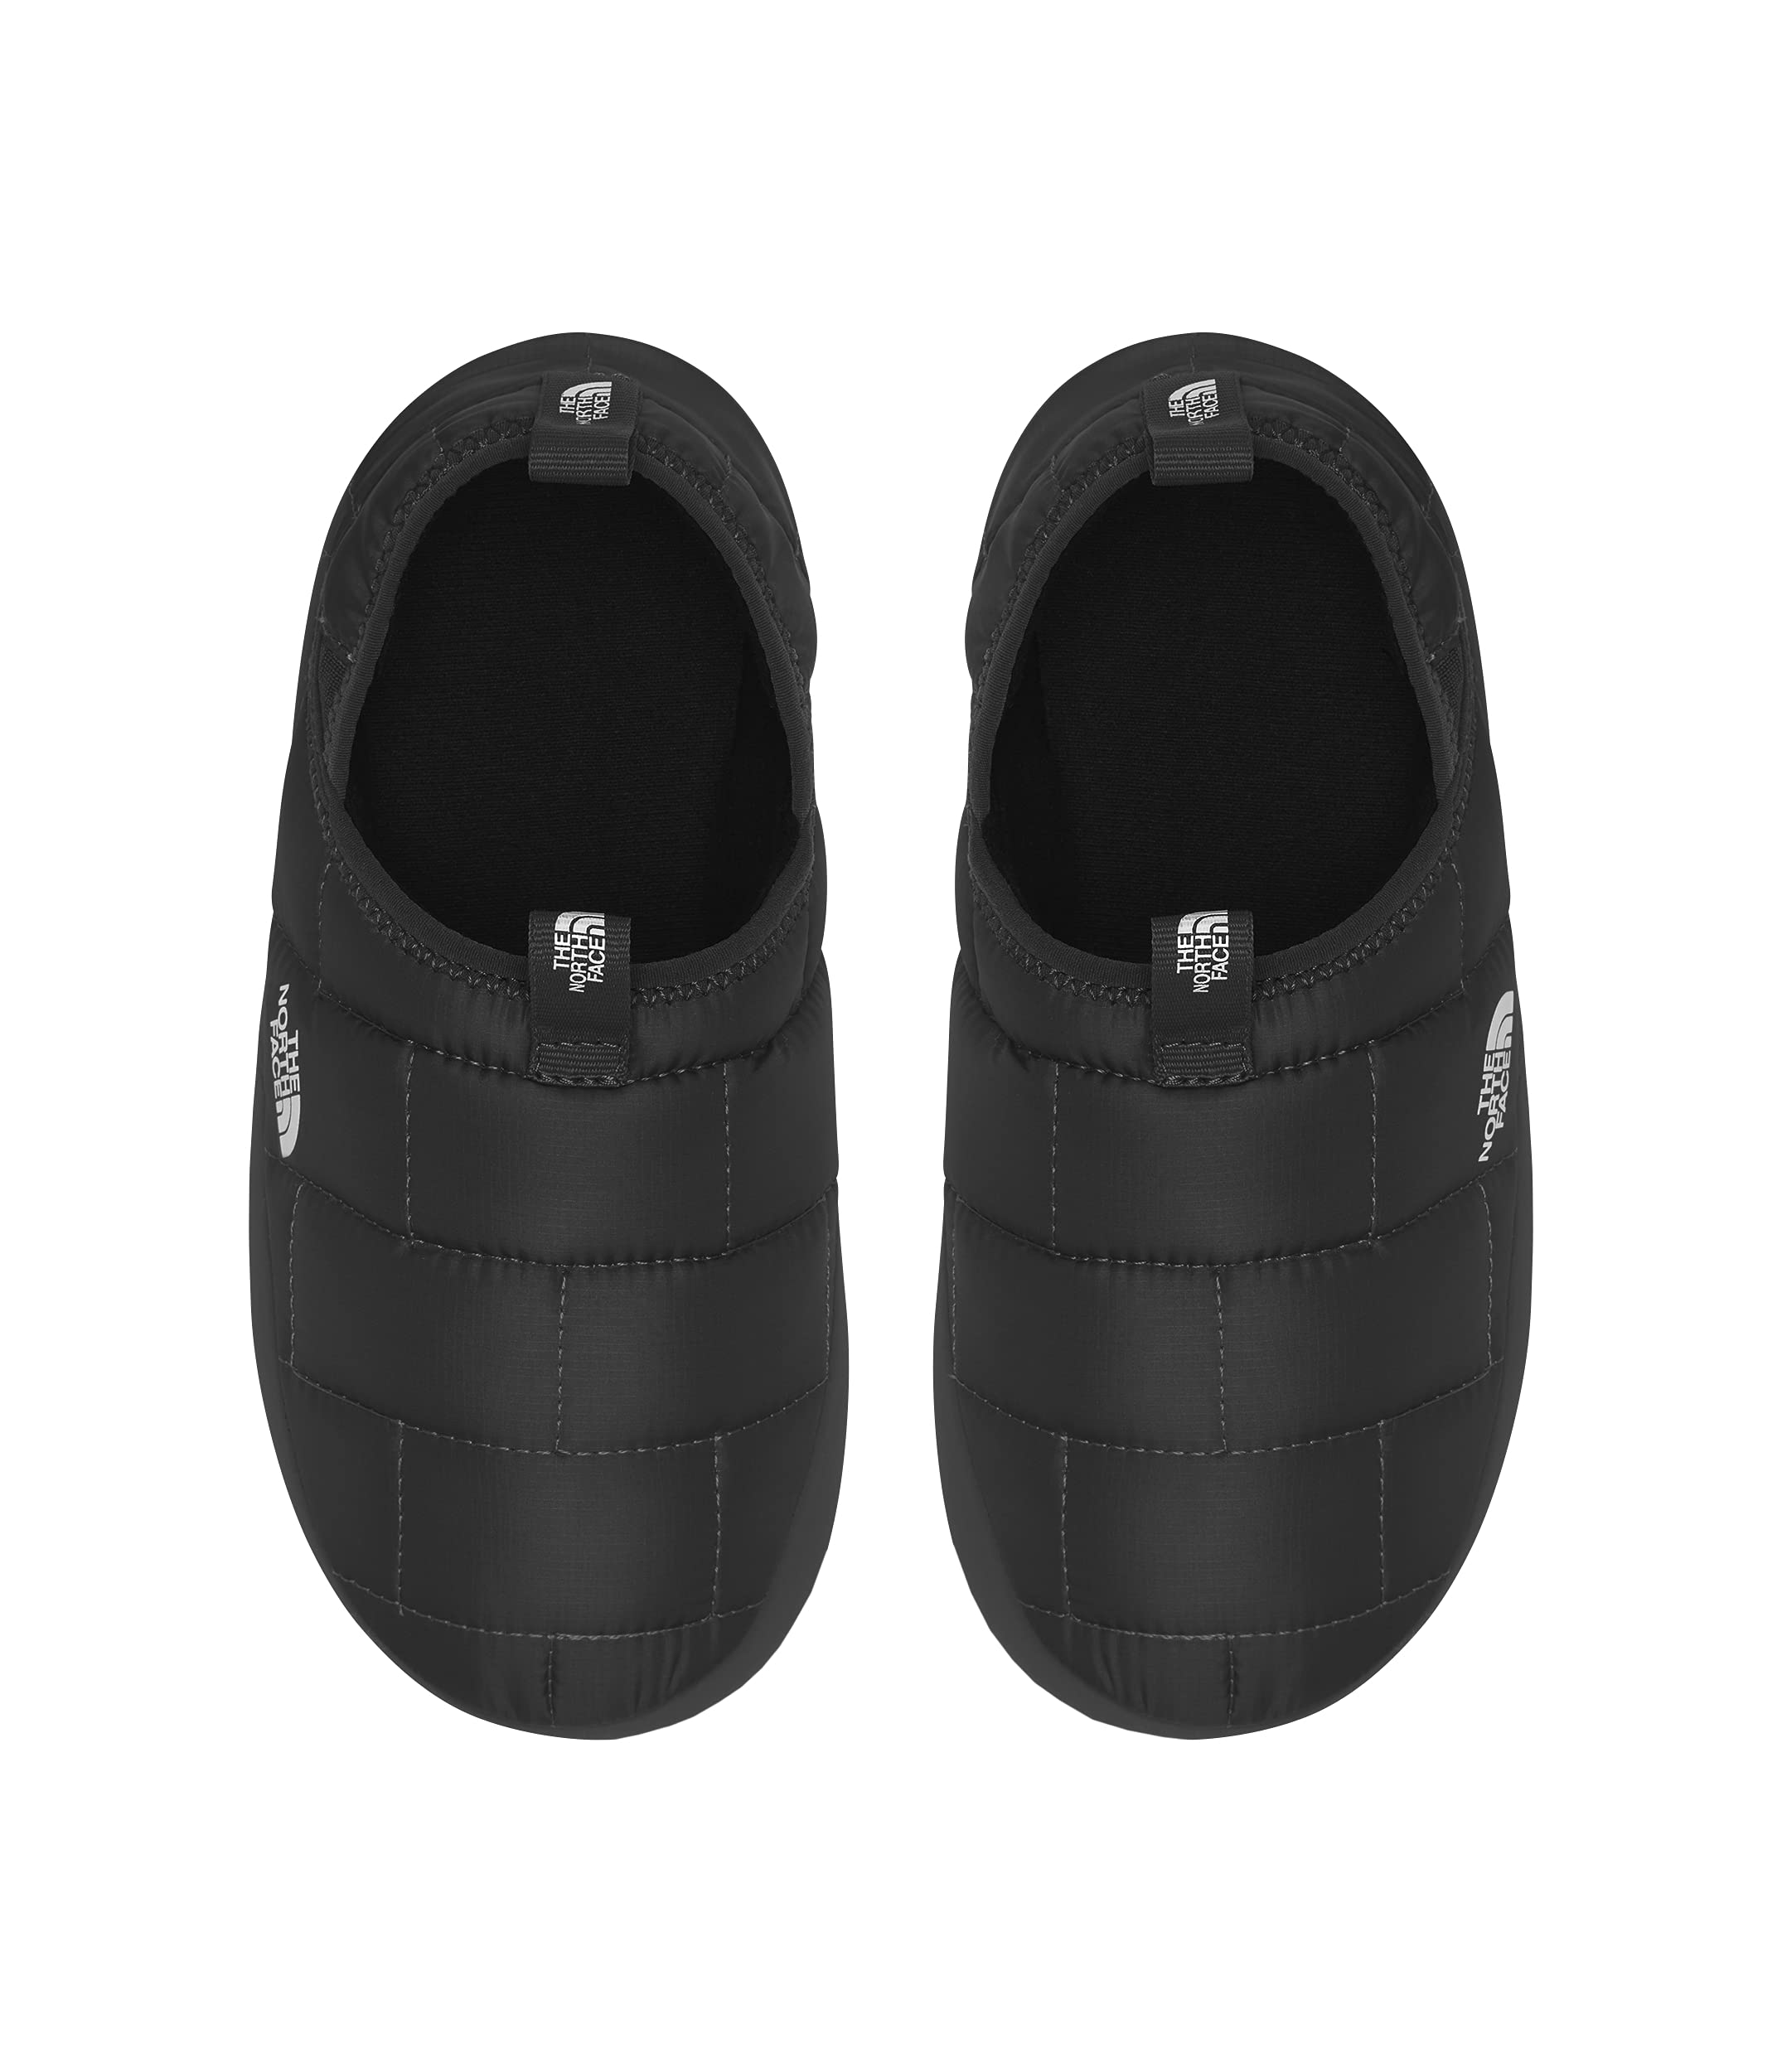 THE NORTH FACE Thermoball Traction Mule II Kids Slippers